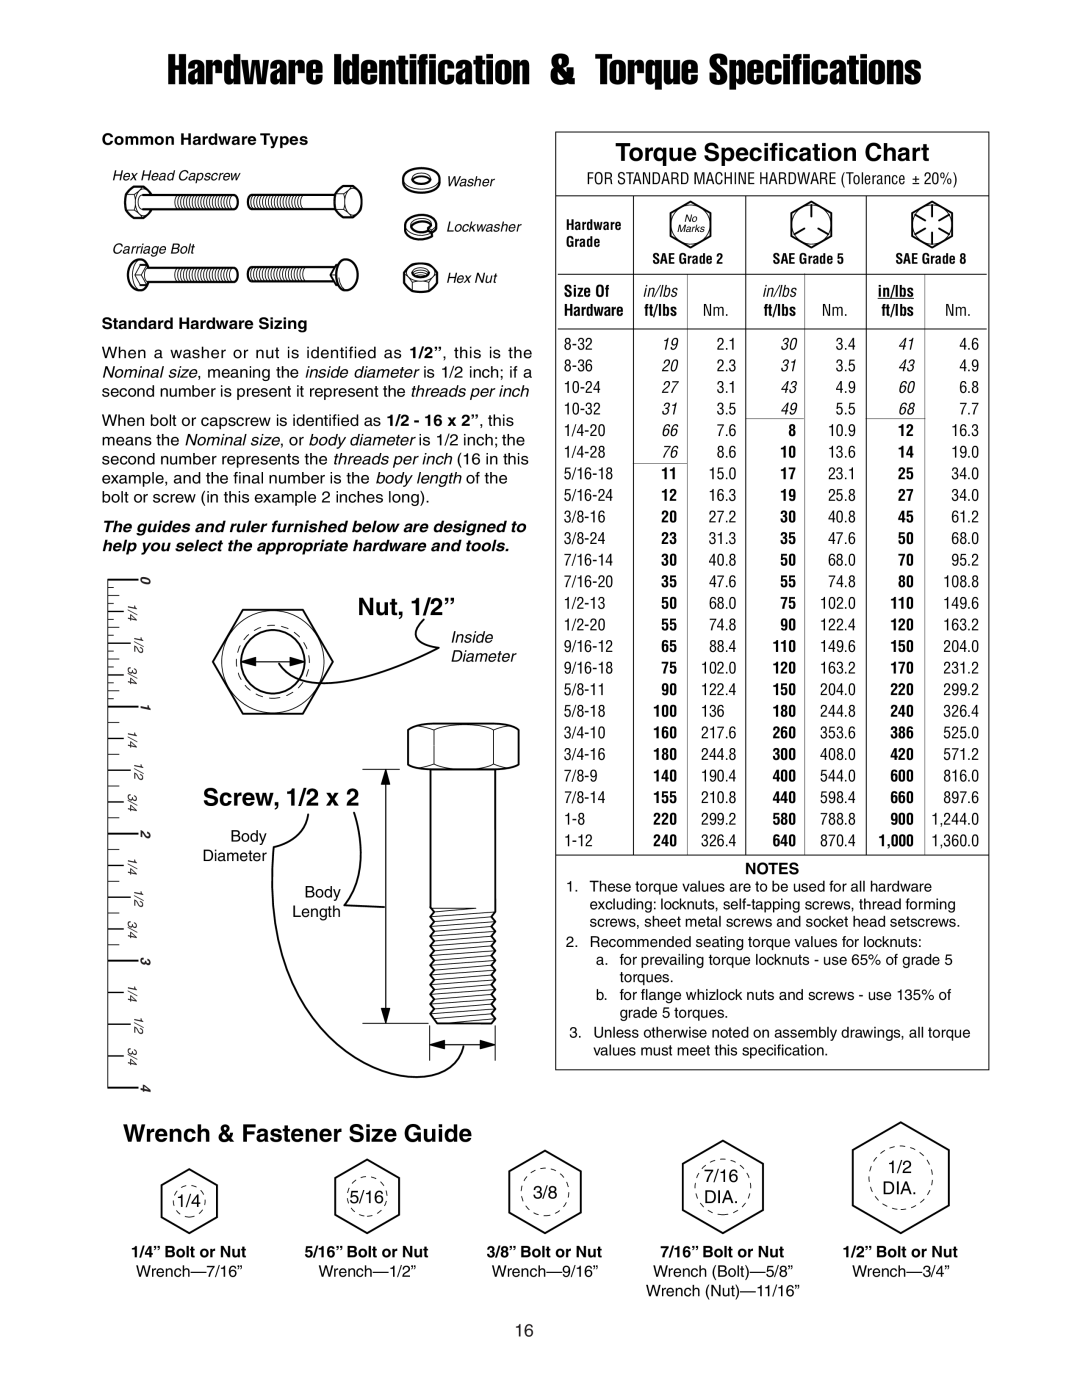 Snapper Clean Sweep Twin Catcher manual Torque Specification Chart, Wrench & Fastener Size Guide, Nut, 1/2”, Screw, 1/2 